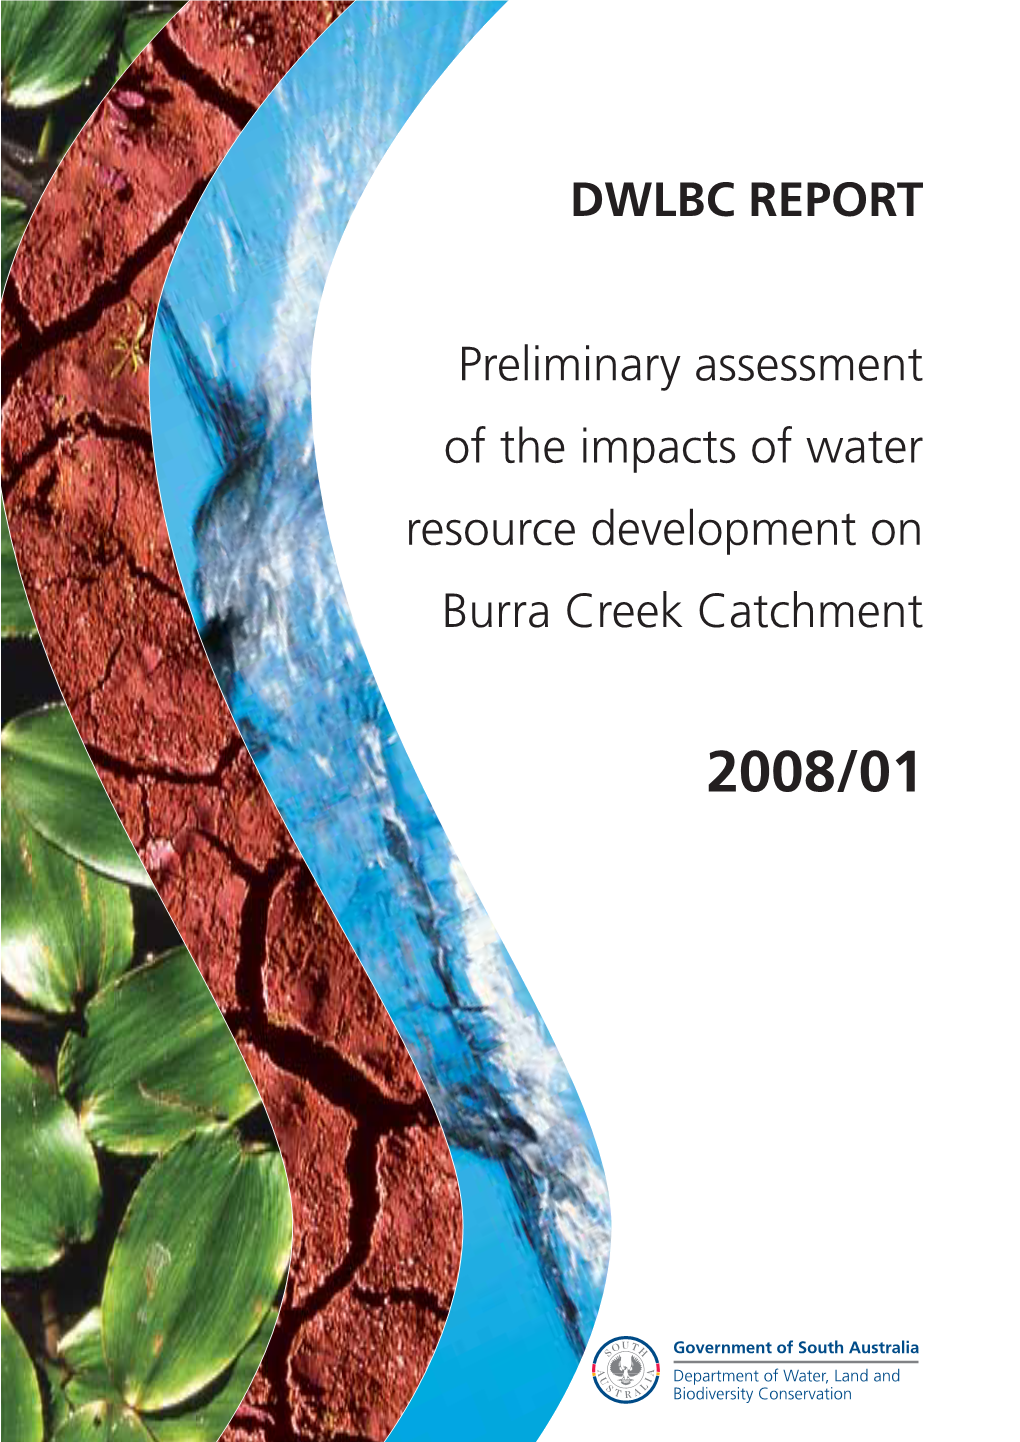 Preliminary Assessment of the Impacts of Water Resource Development on Burra Creek Catchment